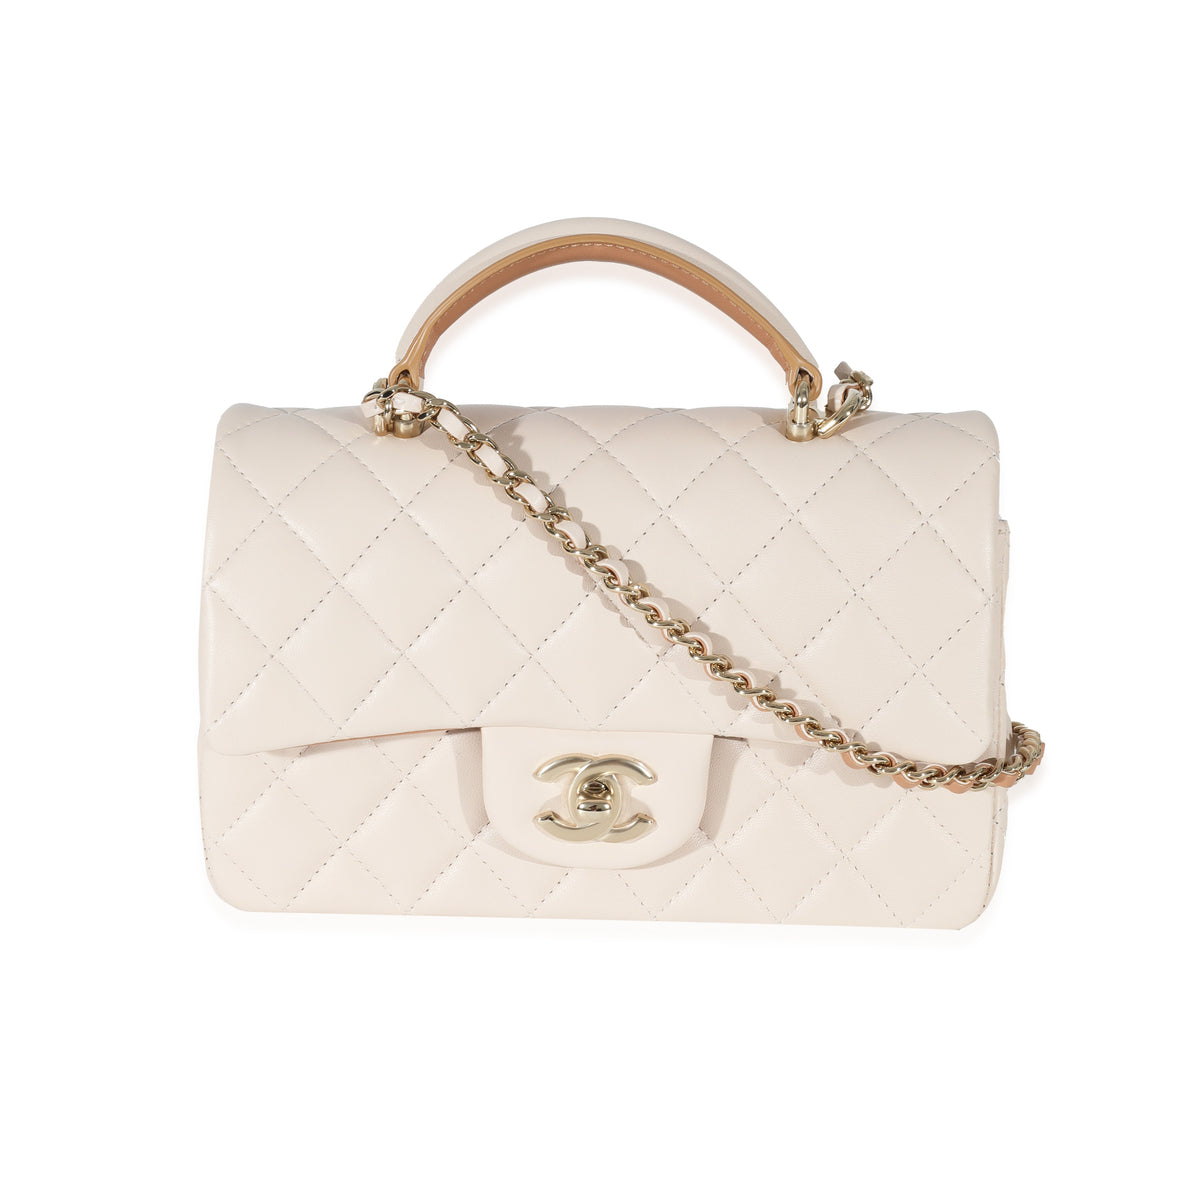 Chanel Mini Rectangular Top Handle, Pink Lambskin with Gold